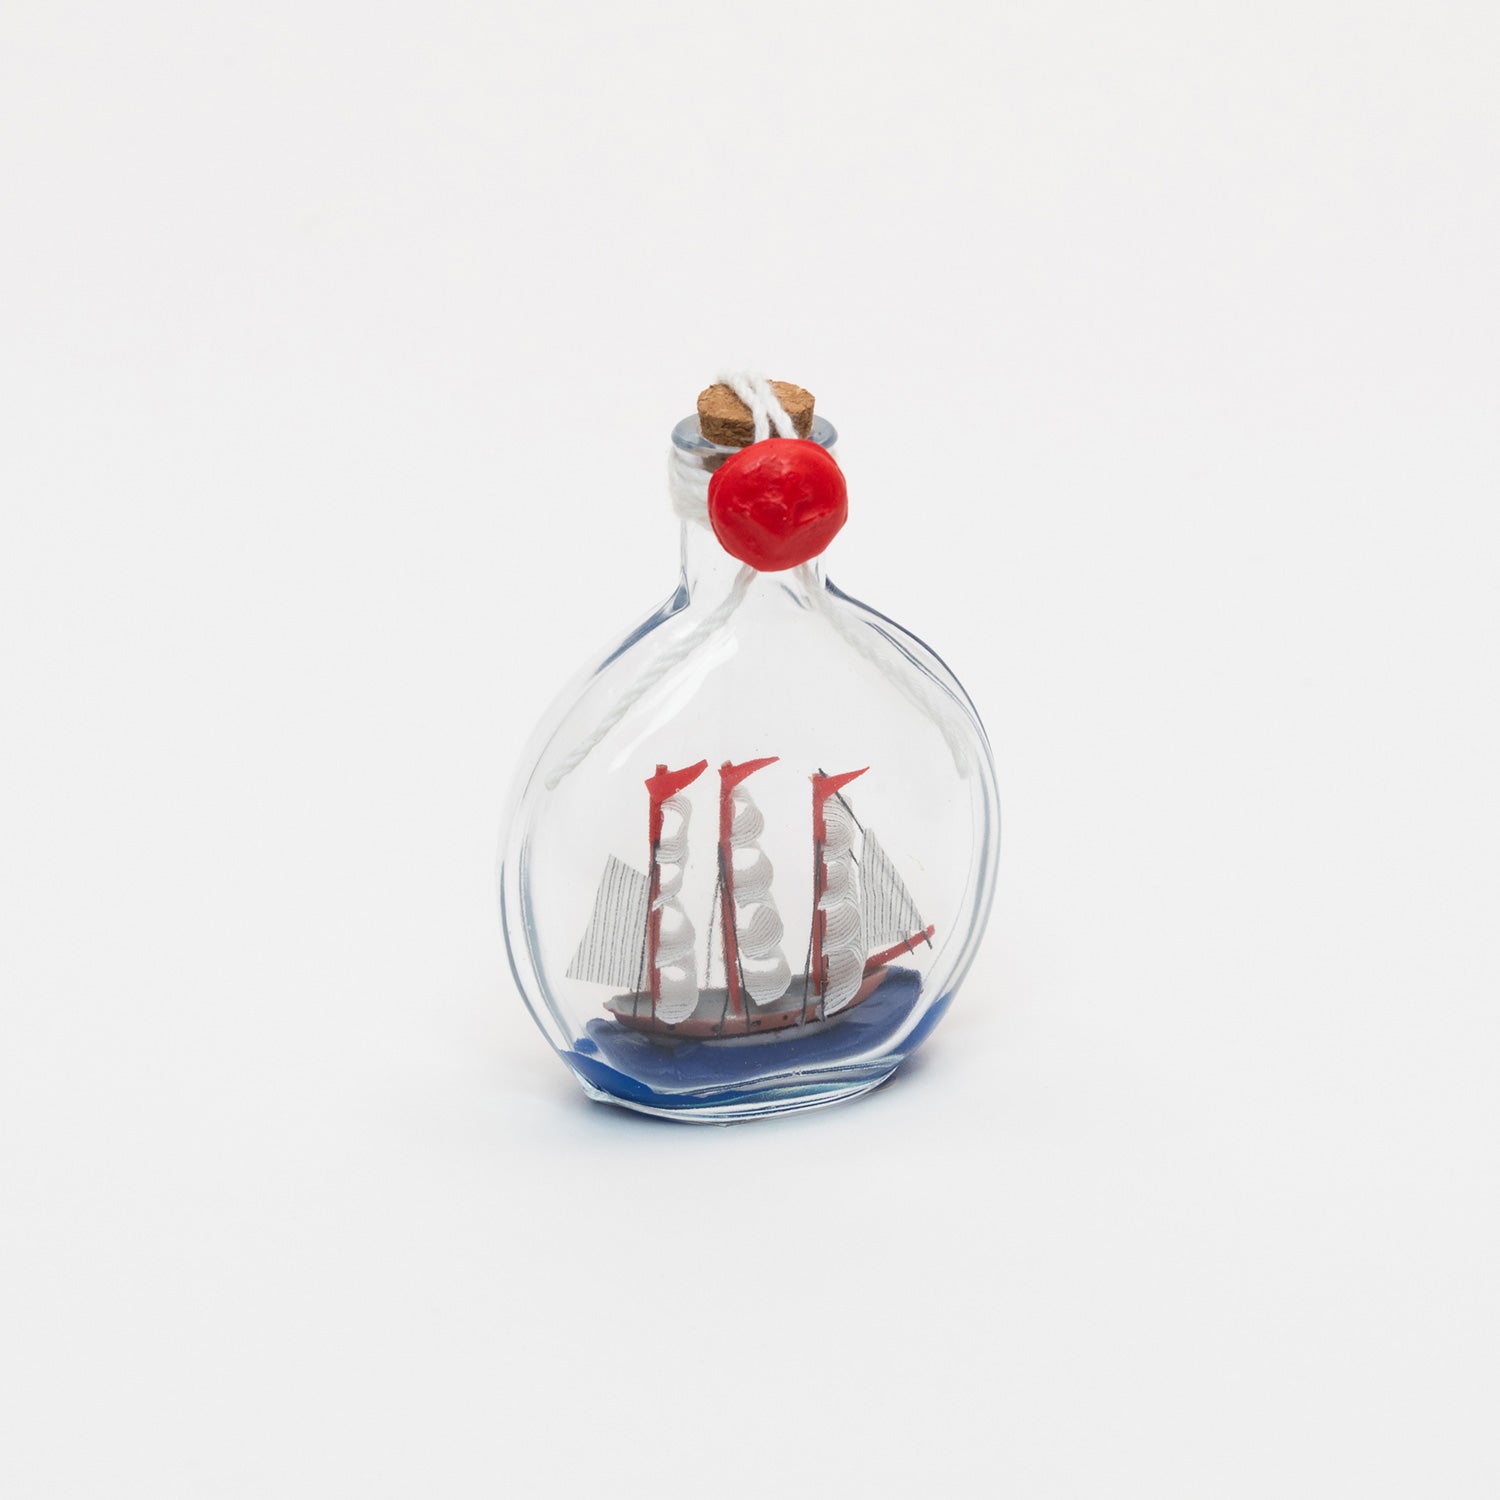 A photo of a small ship in a bottle, on a white background.